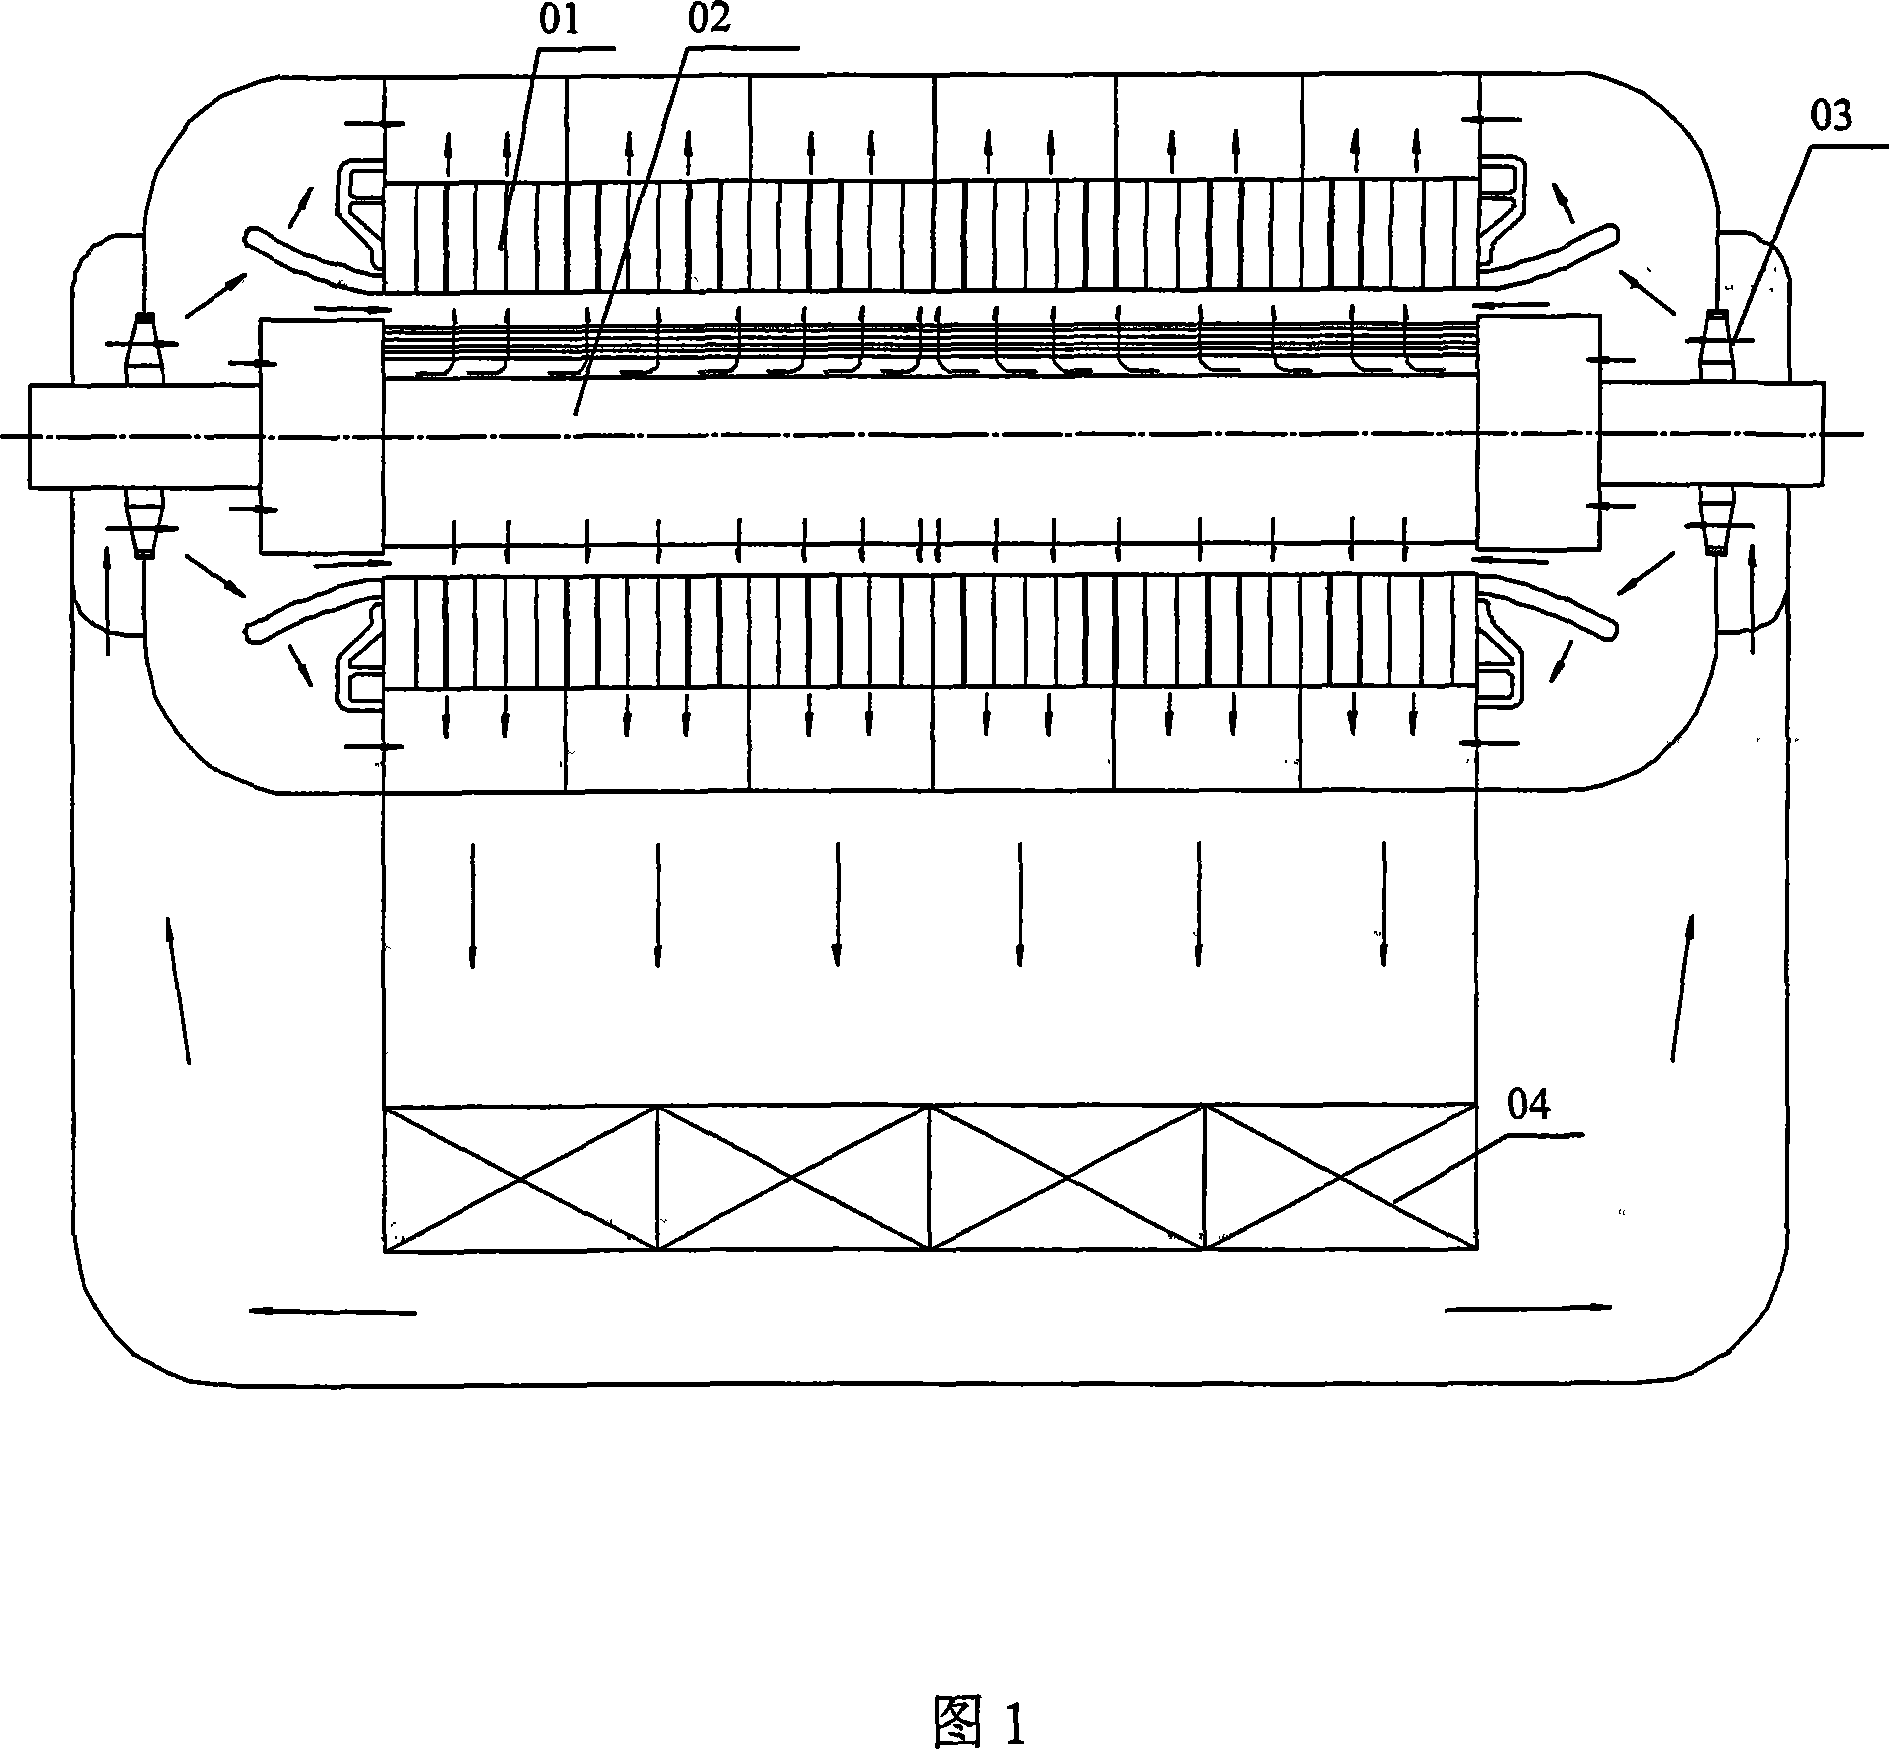 Steamship generator with rotor free cooling and stator evaporation cooling